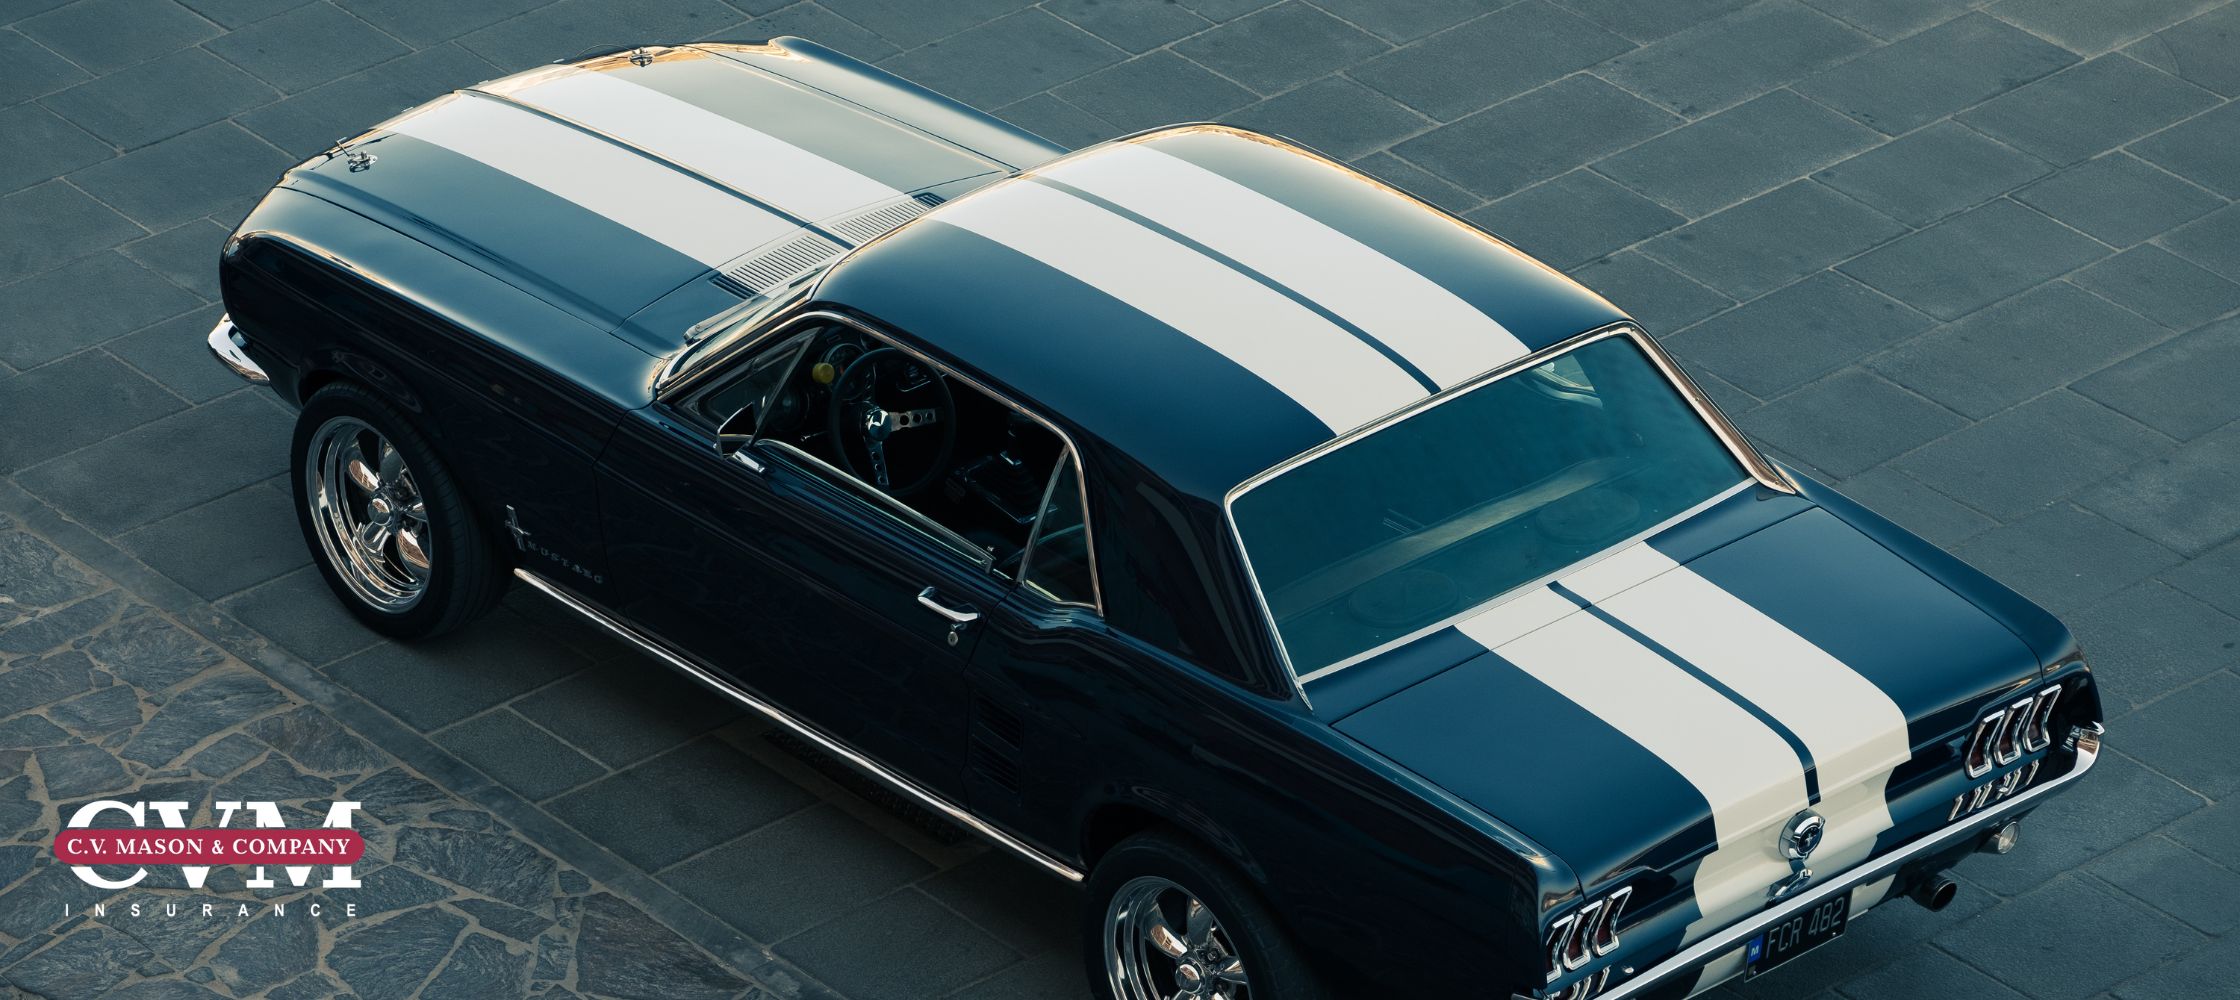 Choosing the Ideal Insurance Coverage for Your Classic Car